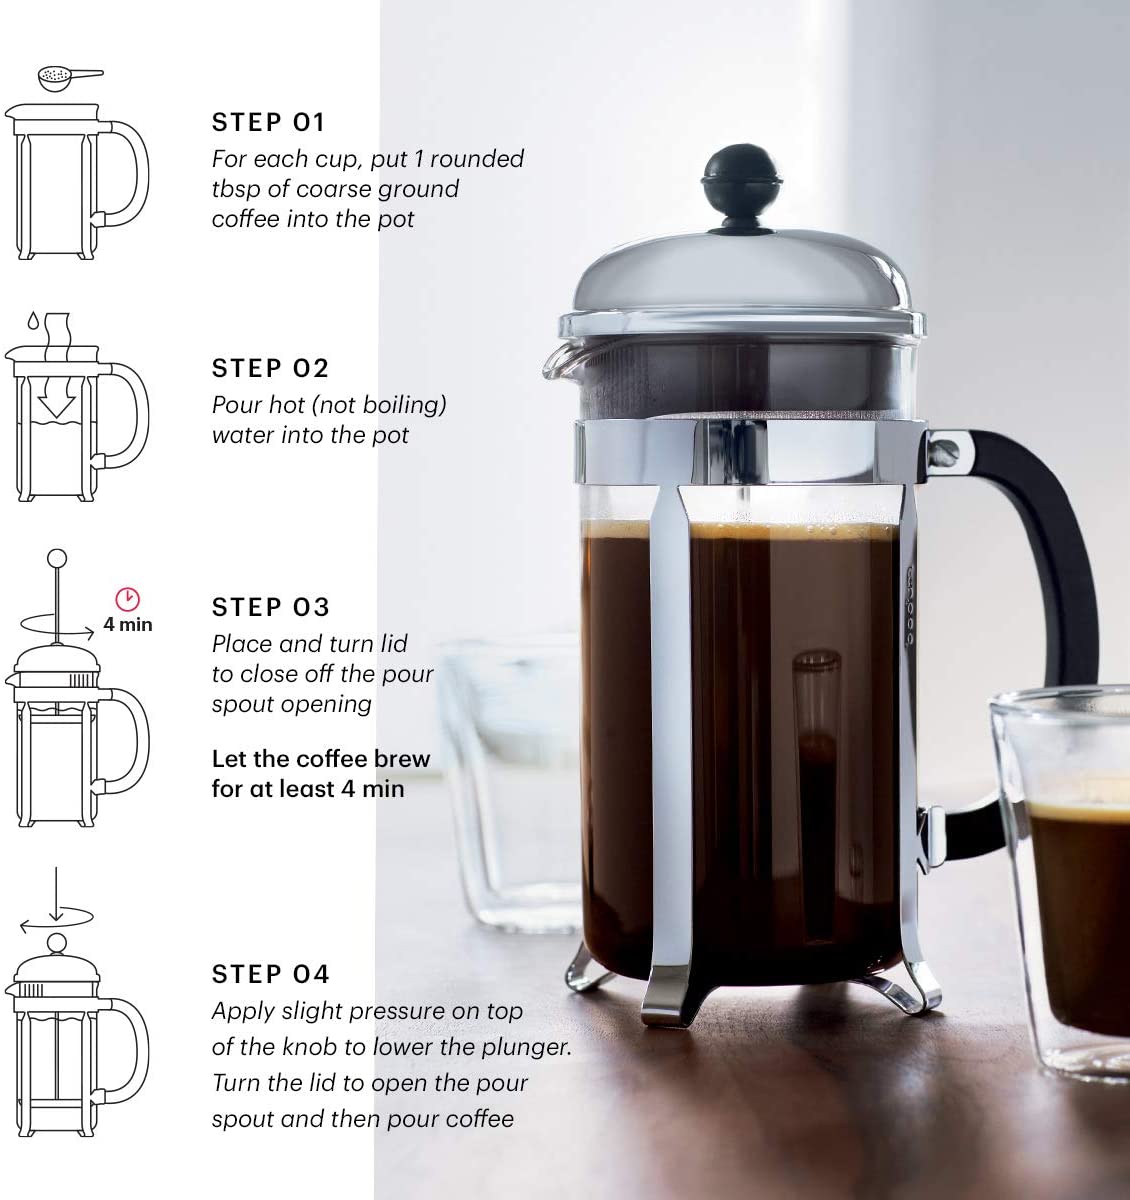 Describing the four steps to brew coffee with the Bodum French Press.